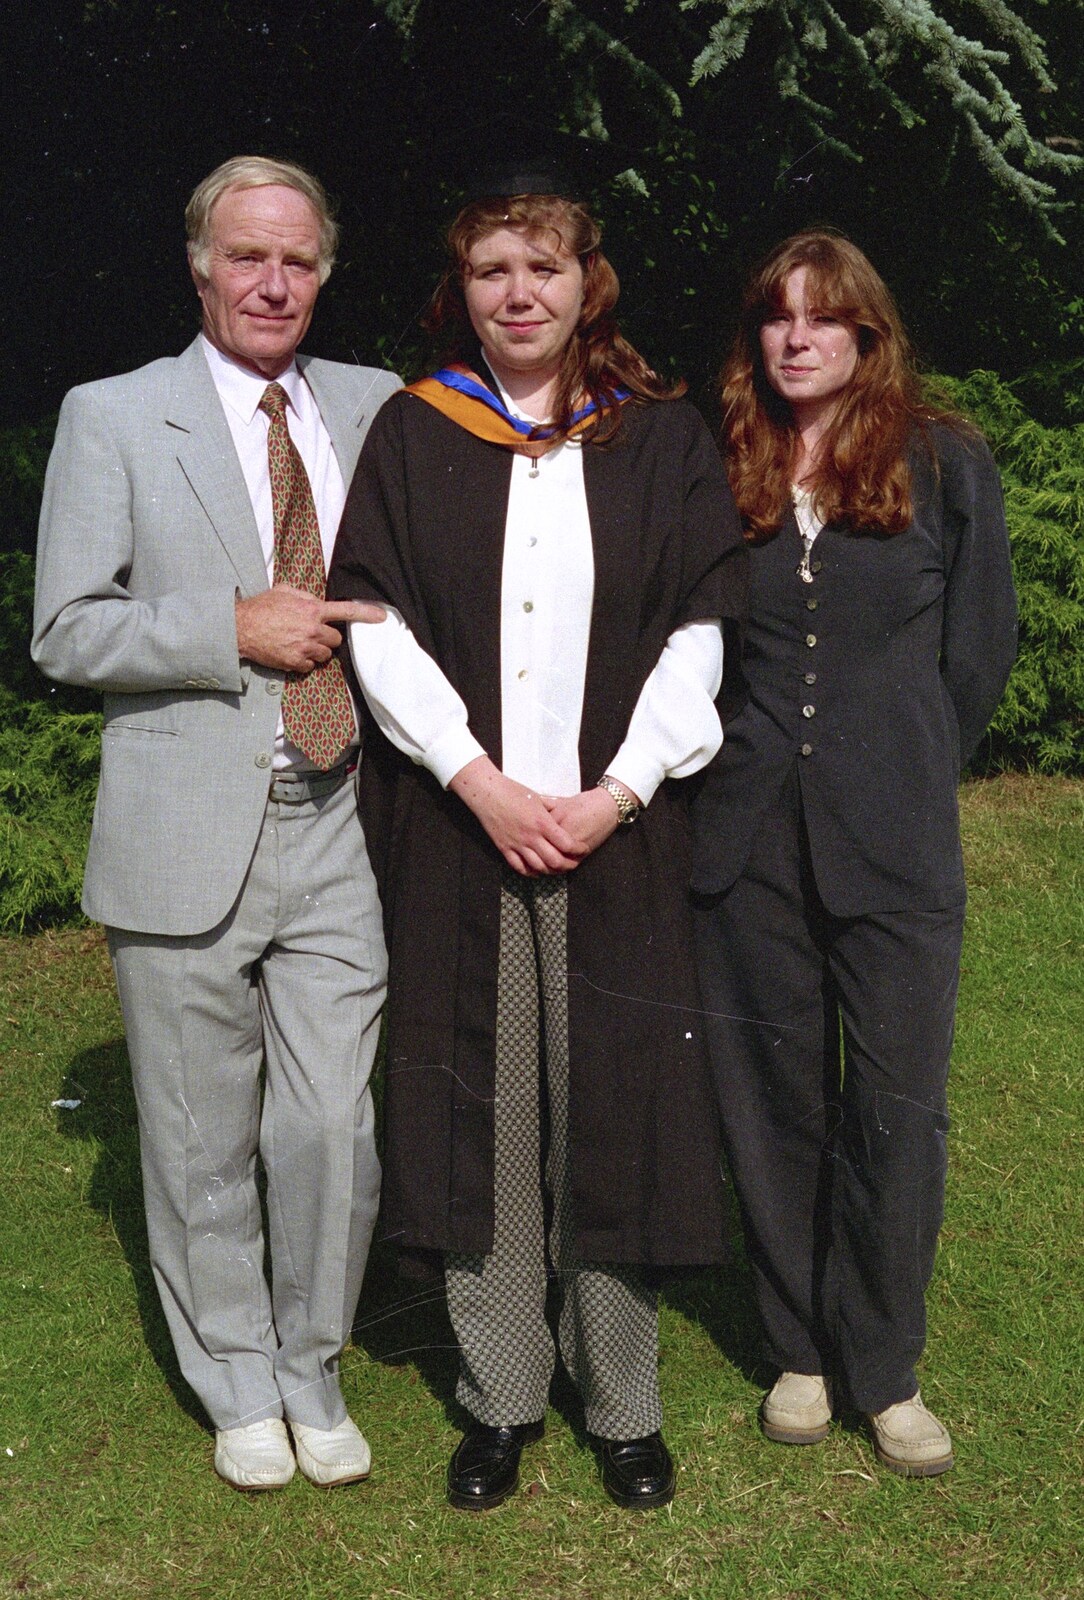 Sis Graduates from De Montfort, Leicester, Leicestershire - 9th August 1997: The Old Chap, Sis and Mel